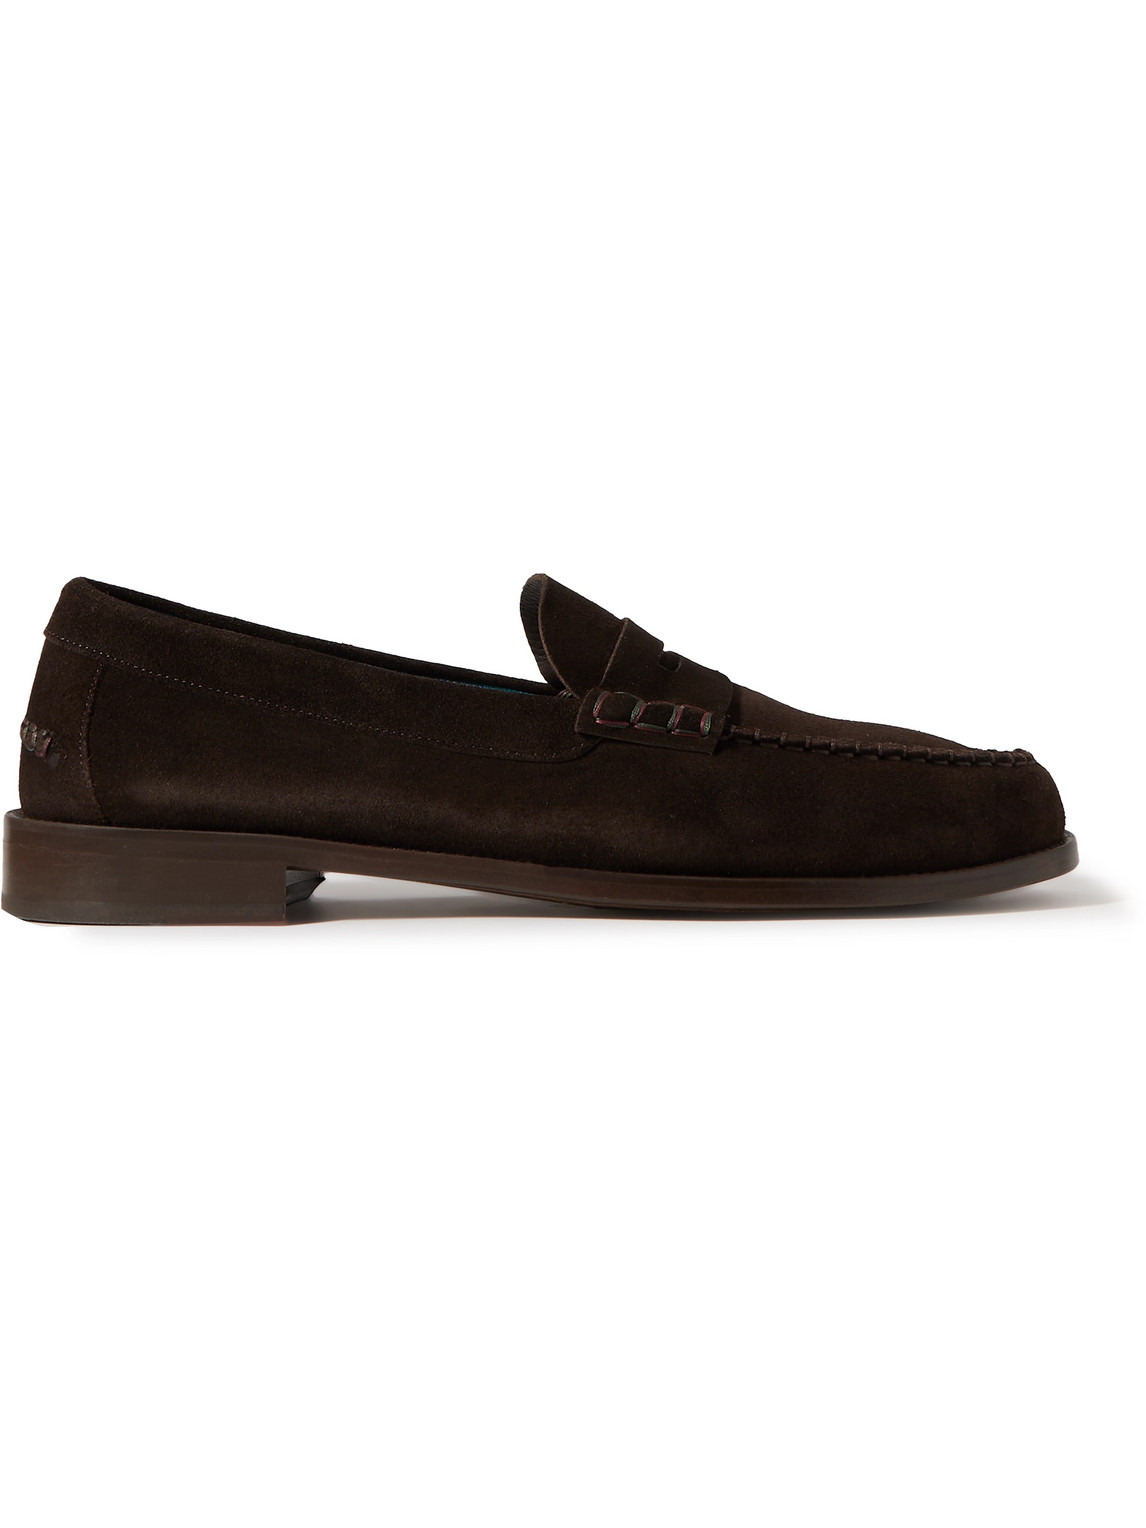 PAUL SMITH LIDO SUEDE LOAFERS